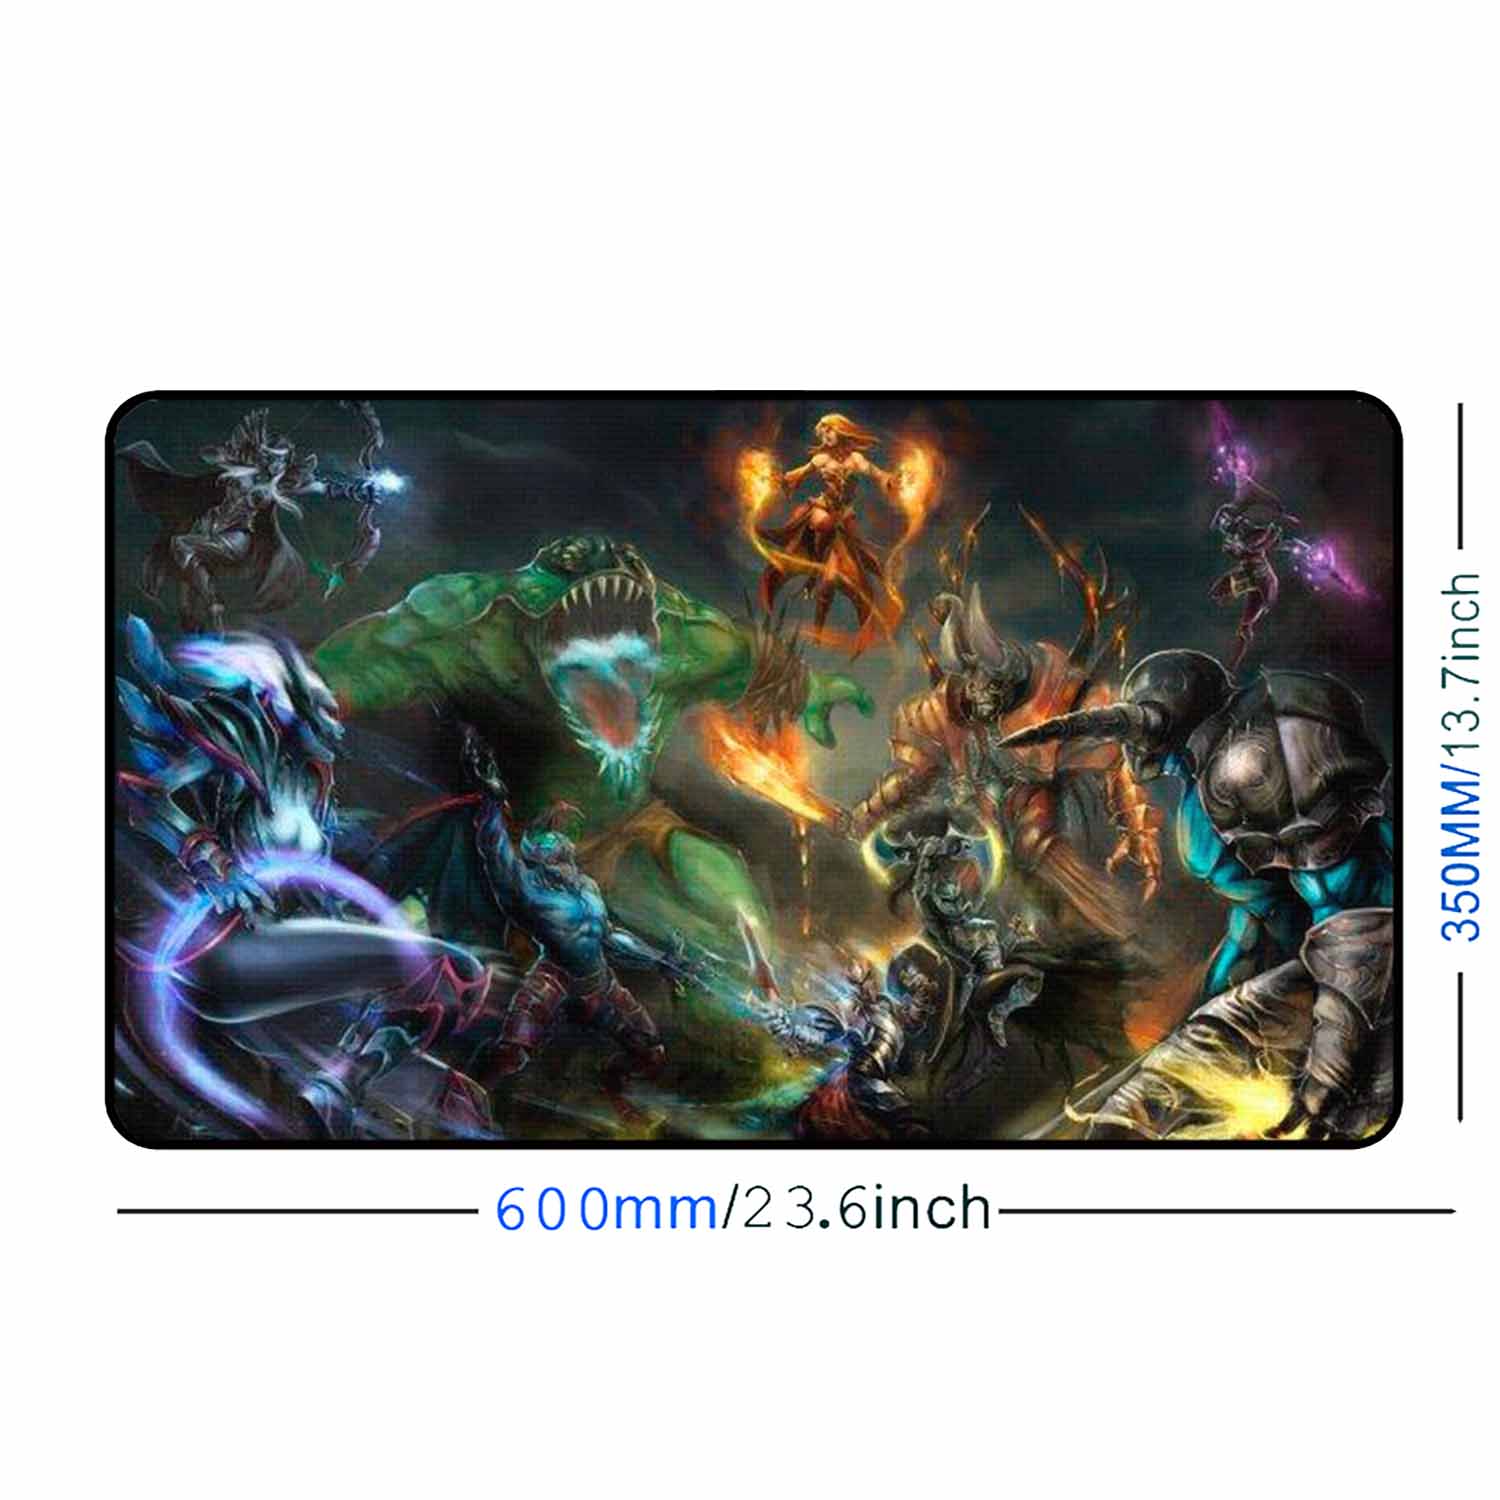 Computer space fiends fight Mouse pad Desk Pad freeshipping - garageartaustralia